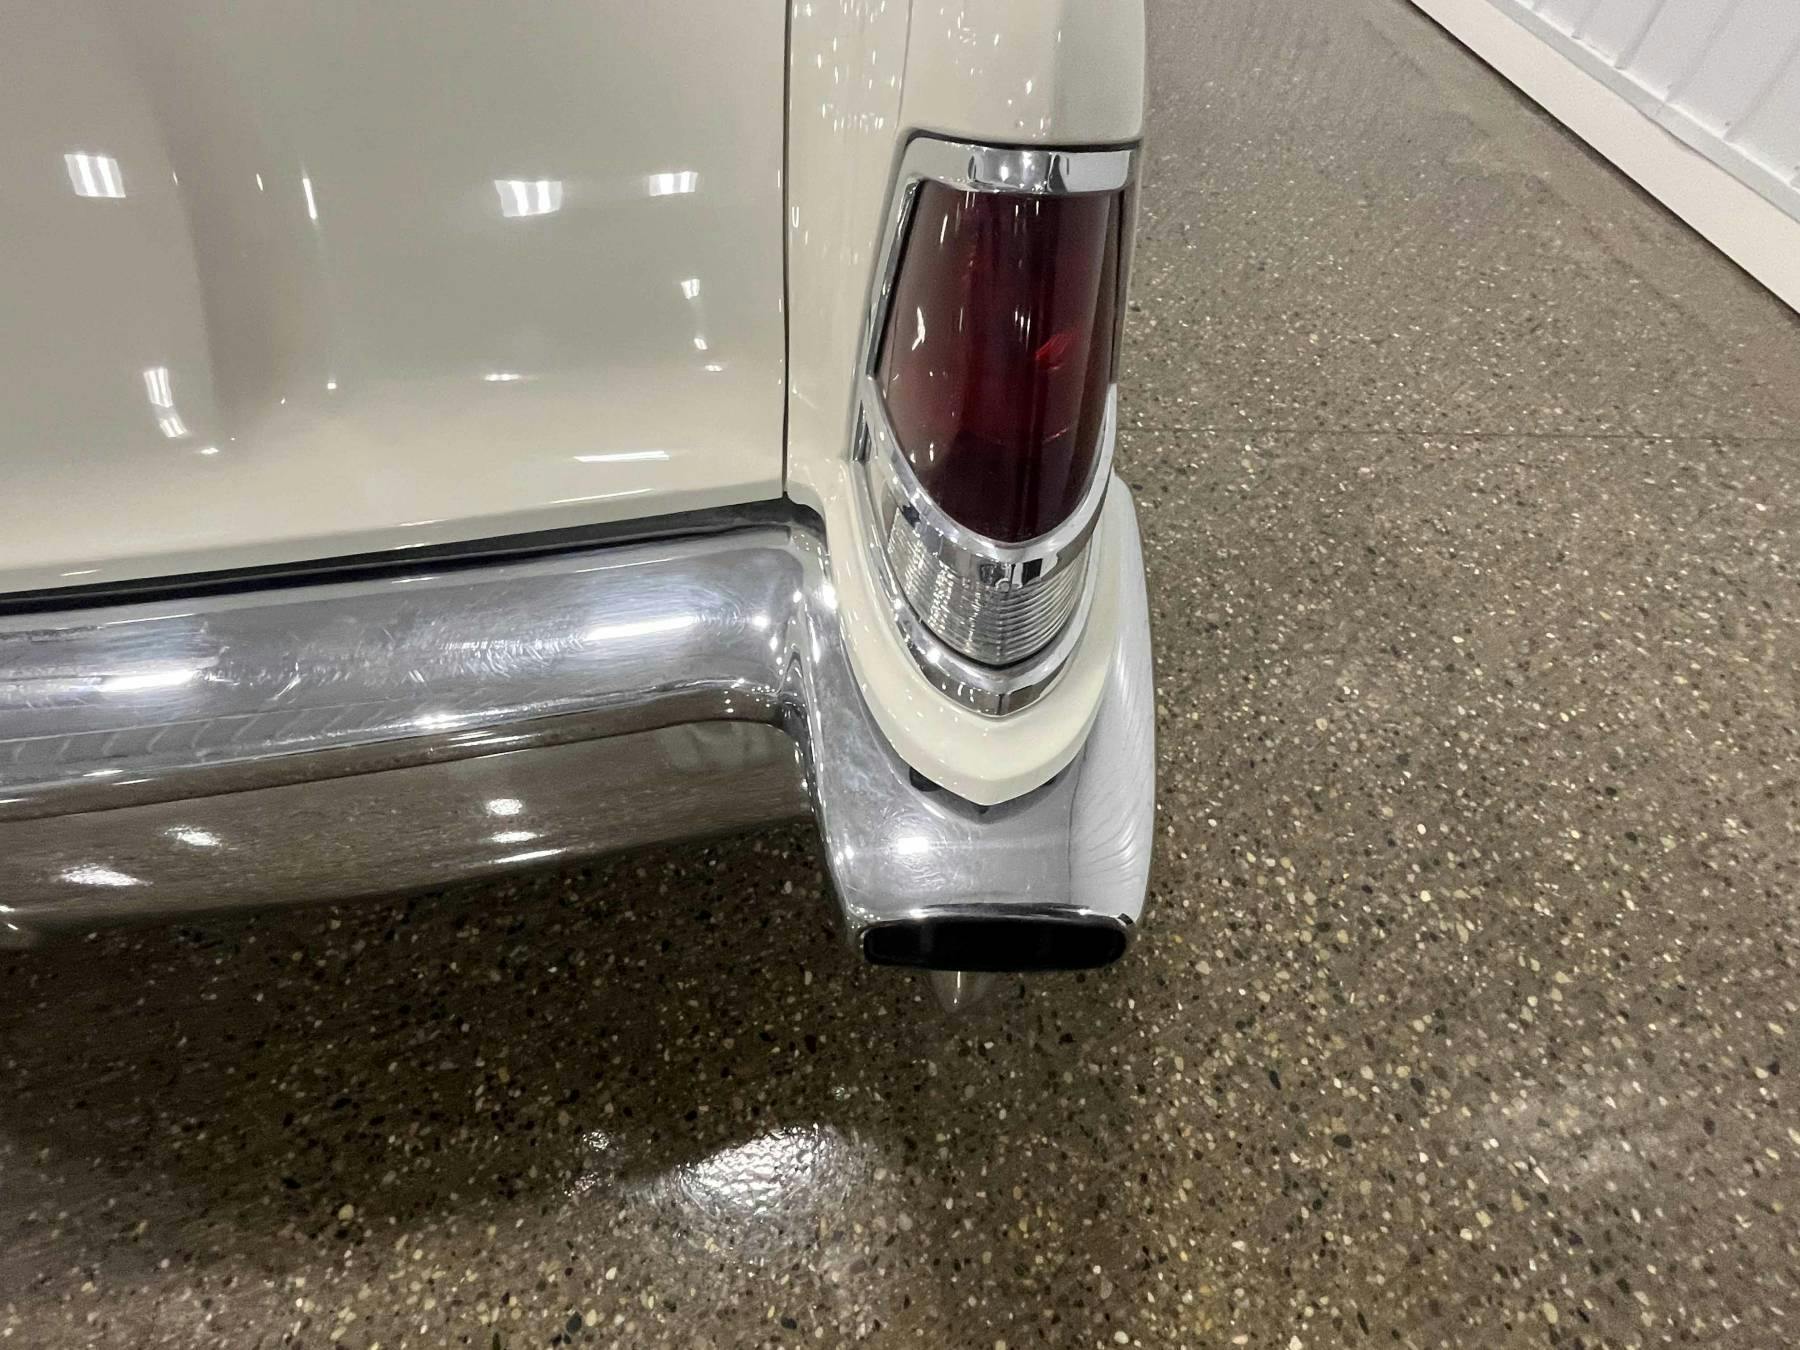 1956 Continental Mark II tailpipe outlet